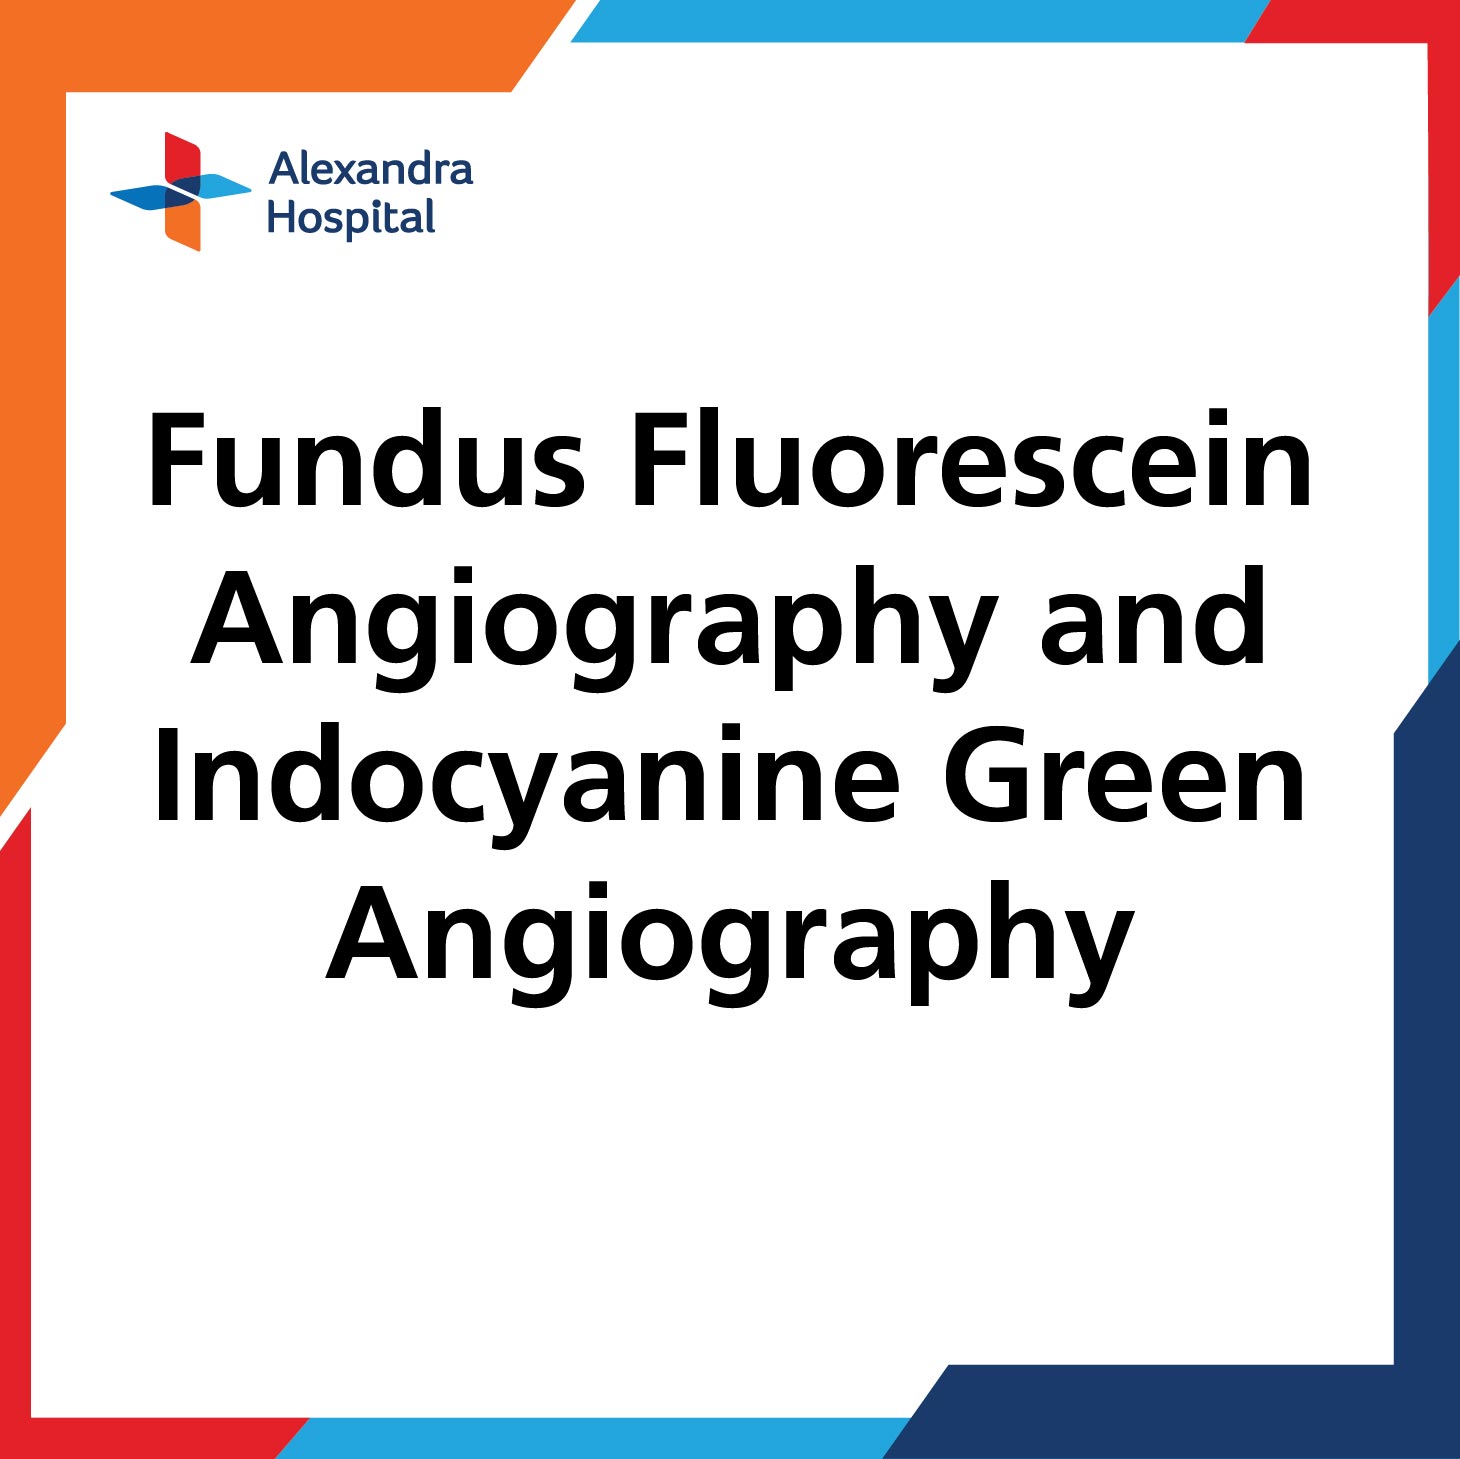 Fundus Fluorescein Angiography and Indocyanine Green Angiography